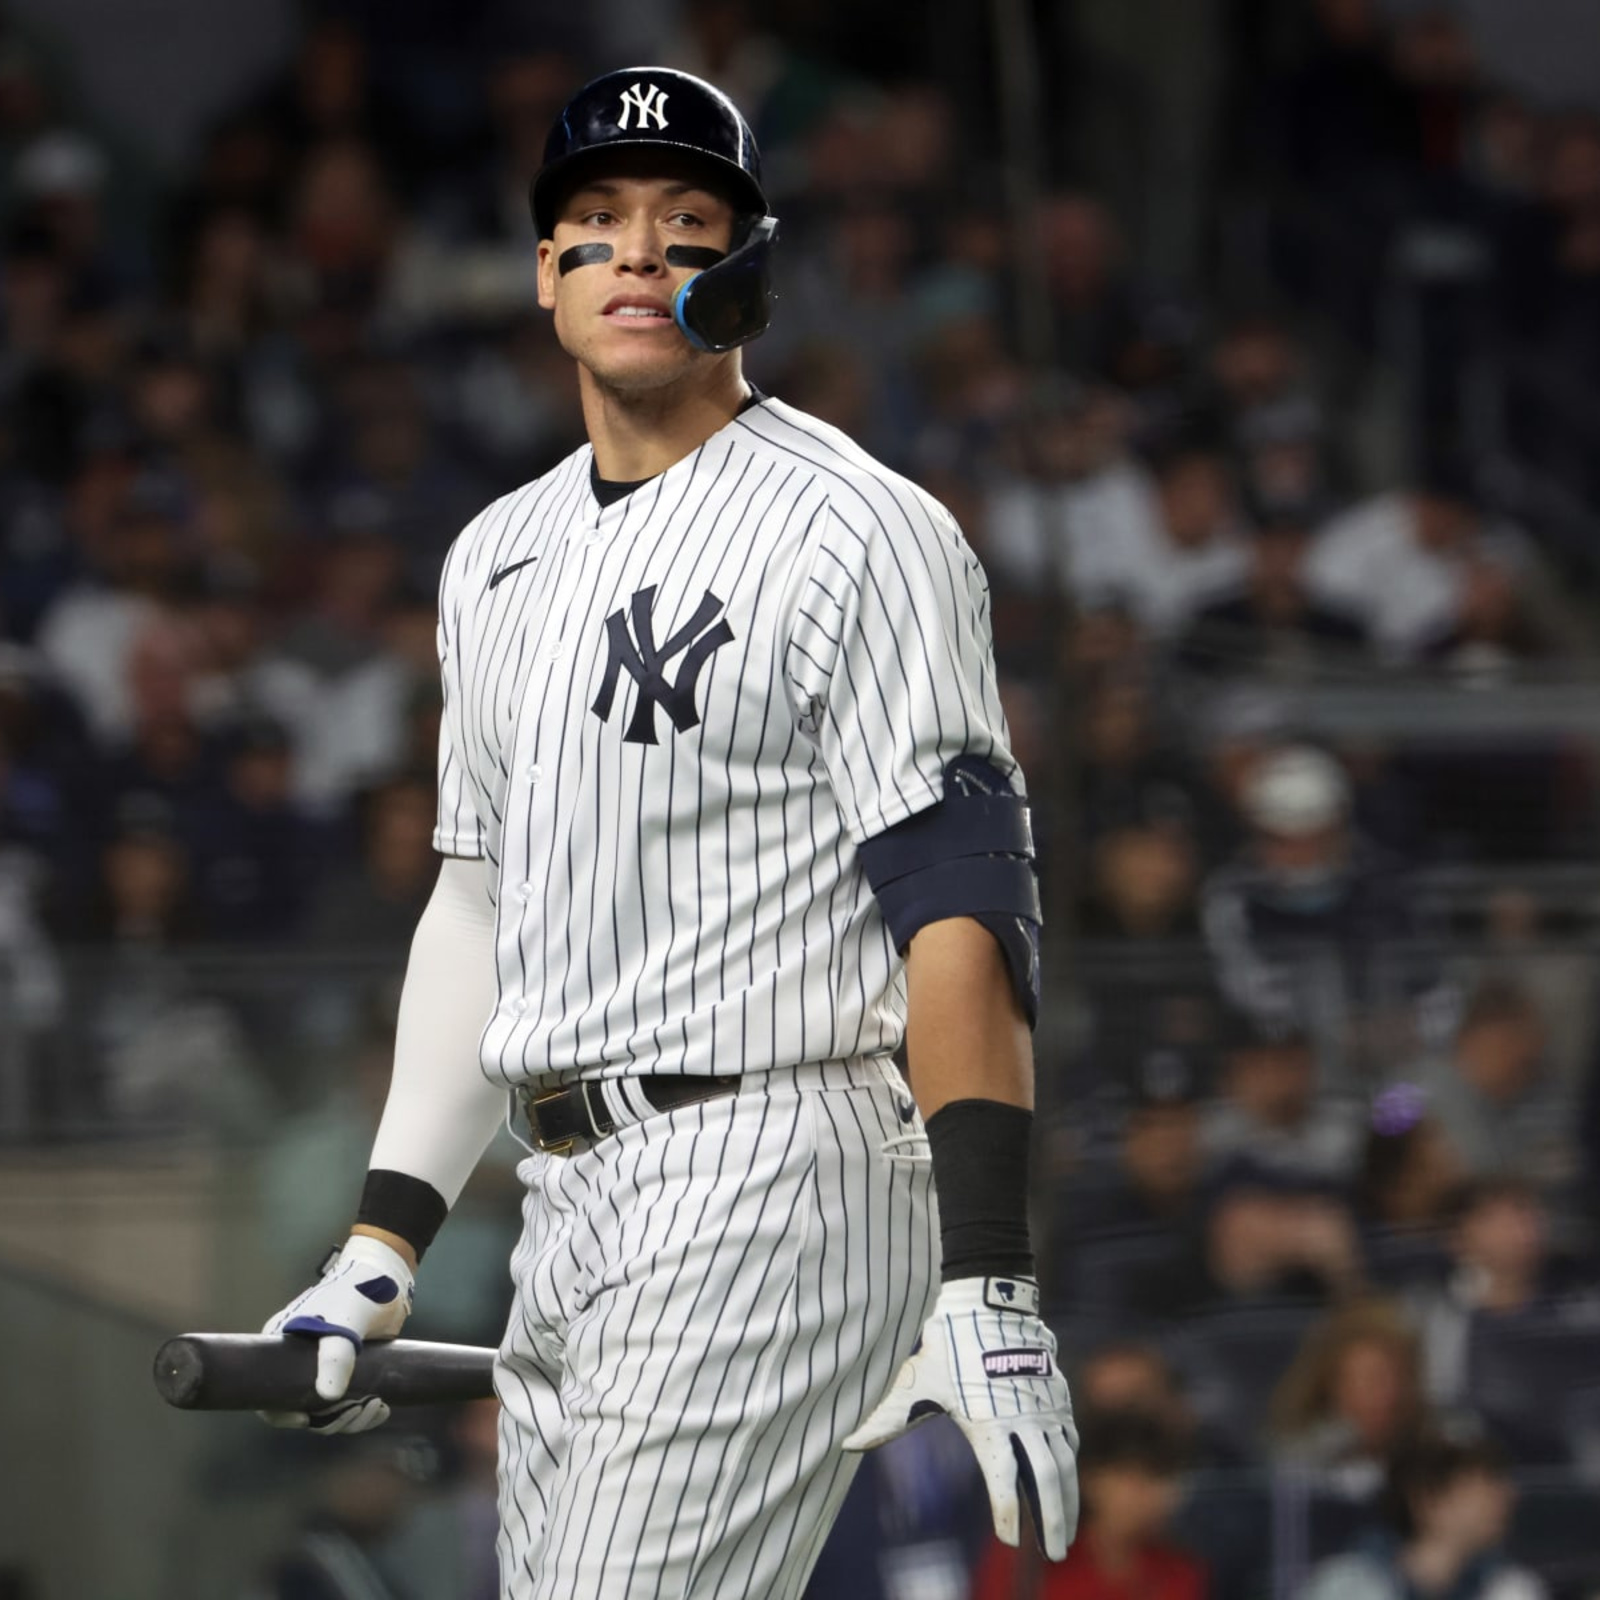 Aaron Judge free agency drama already starting moments after Astros sweep  of Yankees